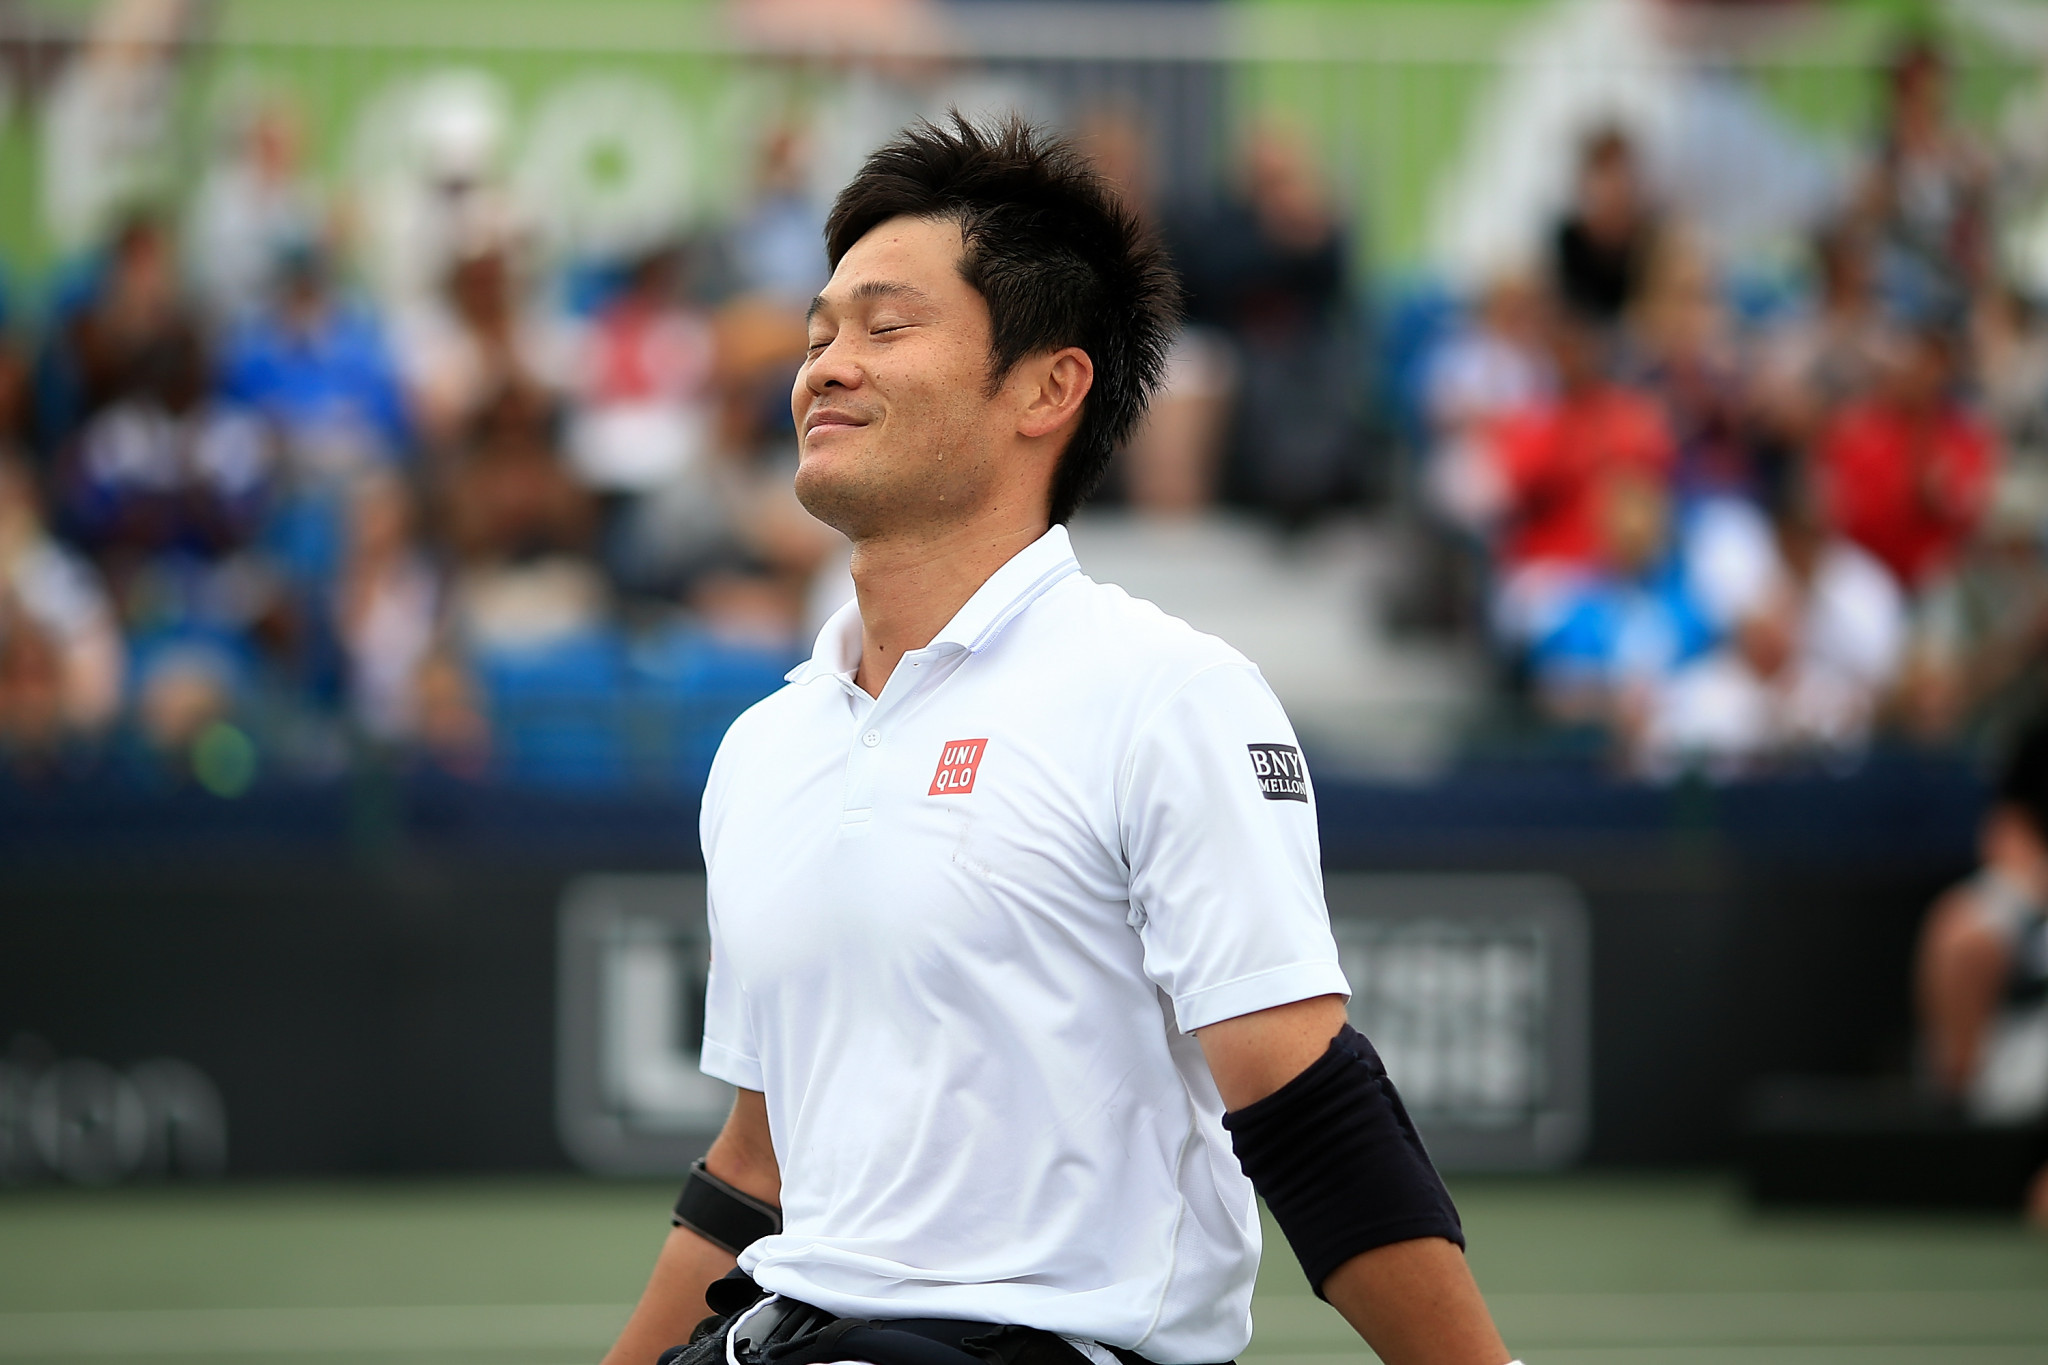 Japan's Shingo Kunieda began the men's competition at the Wheelchair Tennis Masters in Orlando with a 6-4, 6-1 win over France's Nicolas Peifer ©Getty Images